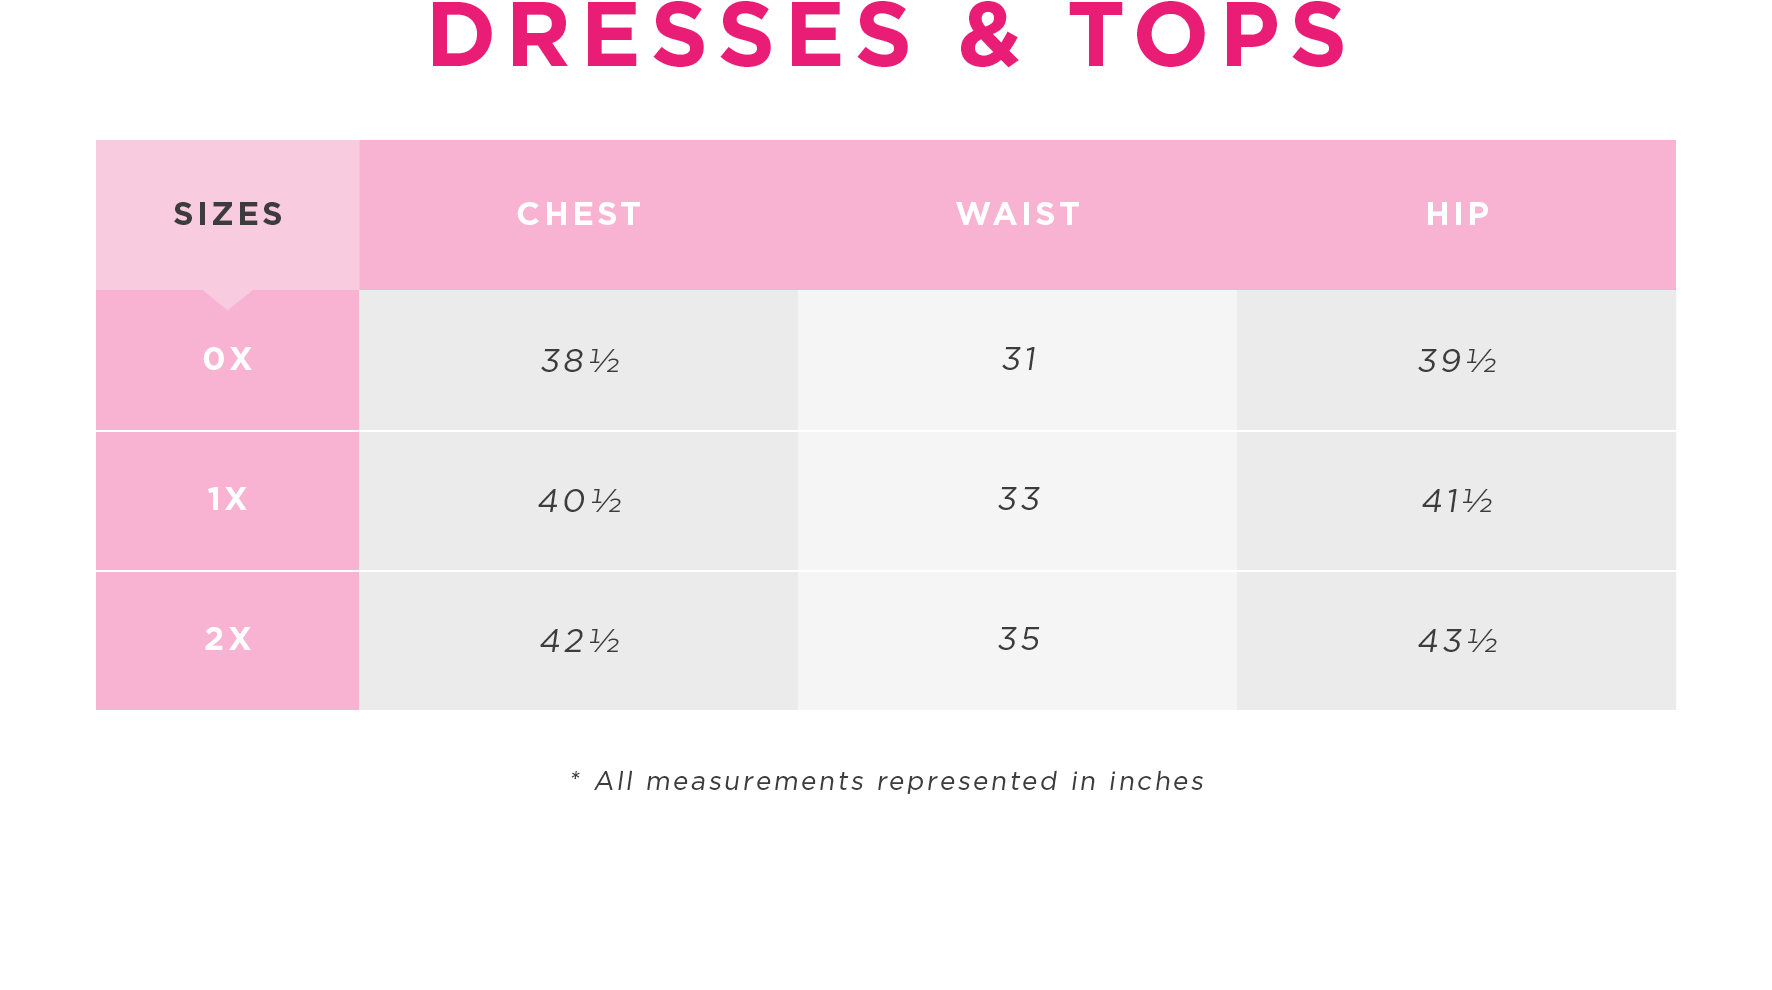 Charlotte Russe - Dresses & Tops Size Guide